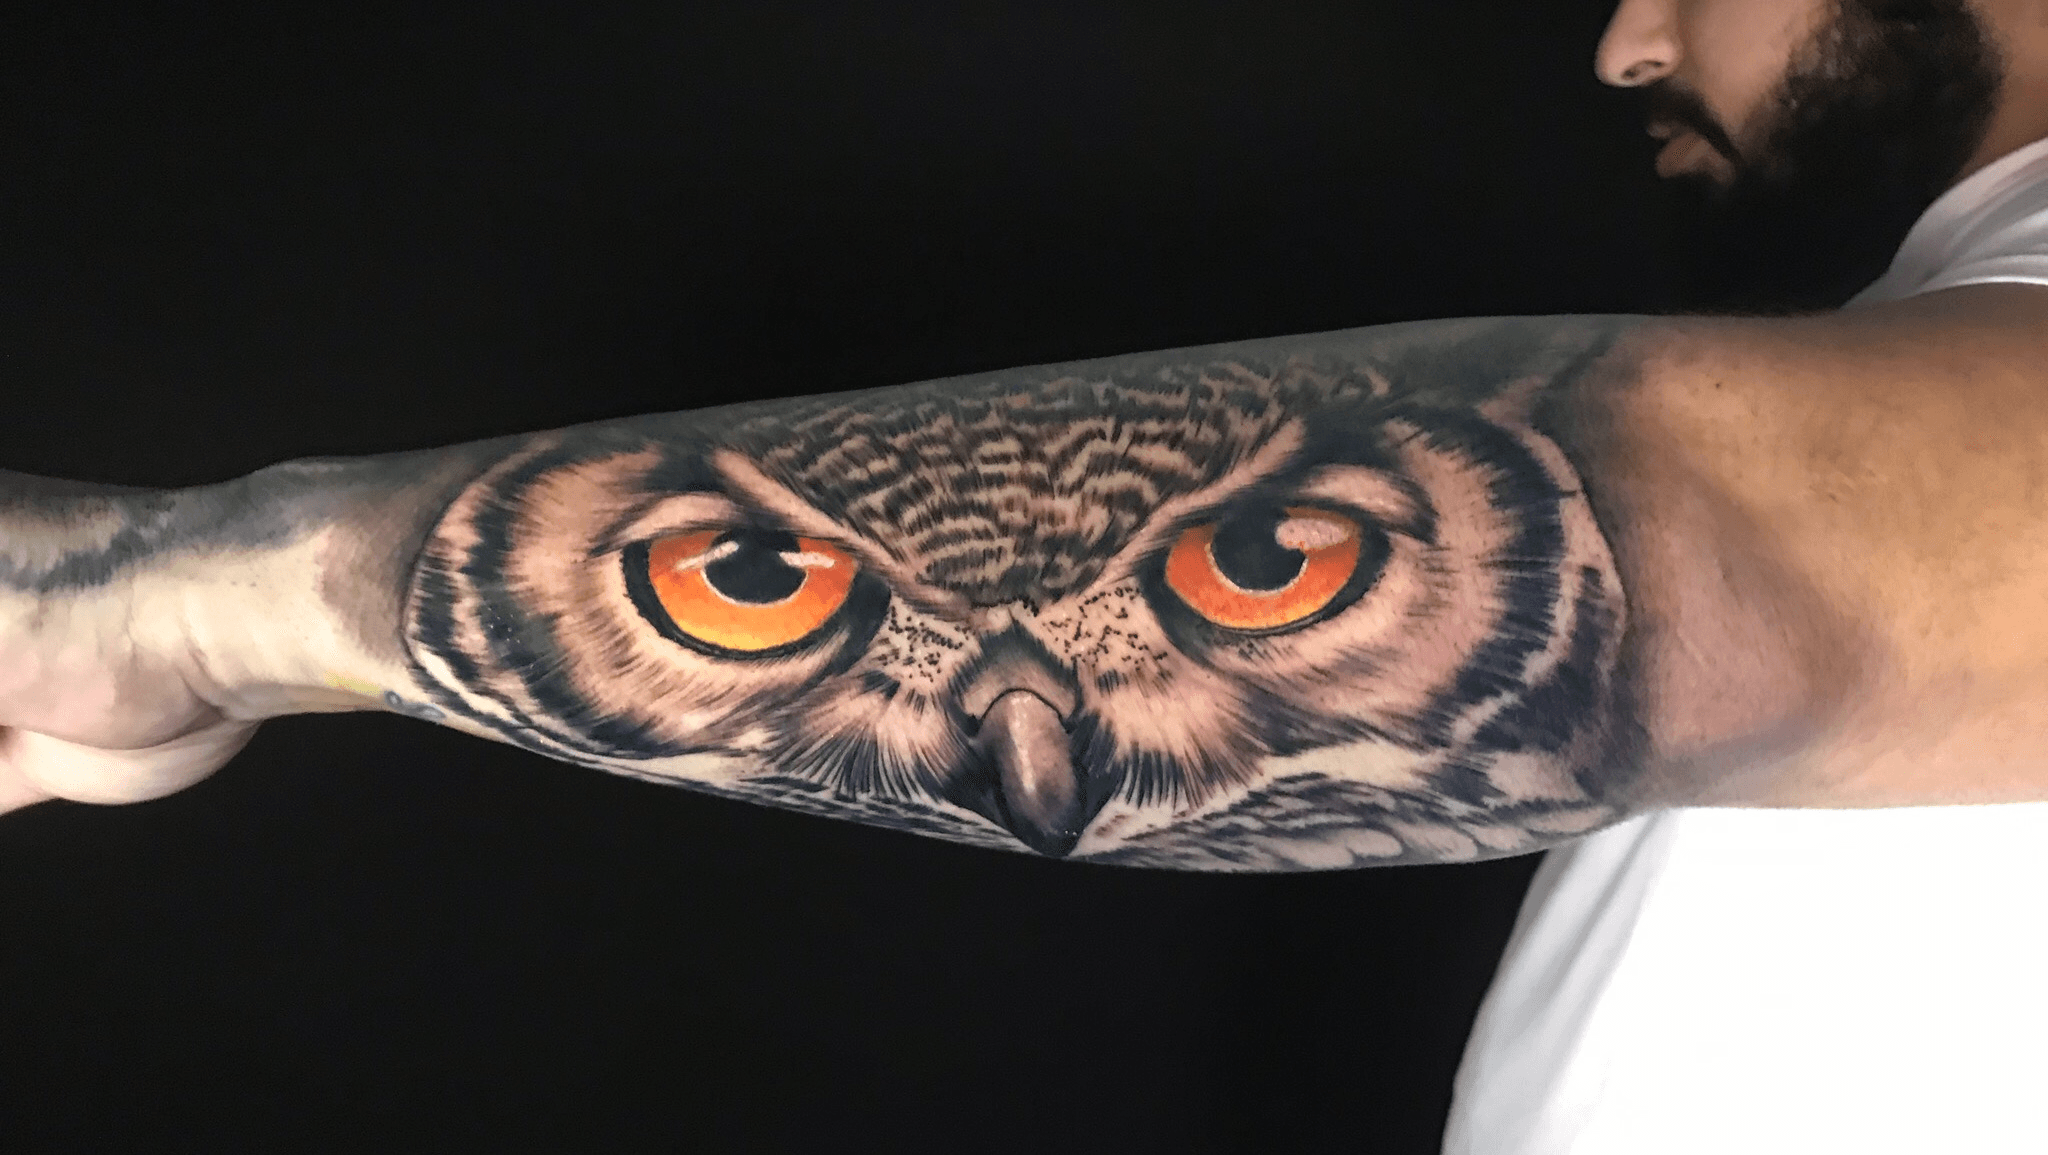 Dark Cloud Tattoo Studios  Tam completed this set of owl eyes the other  day You know if you want something animalistic who to come too   Facebook